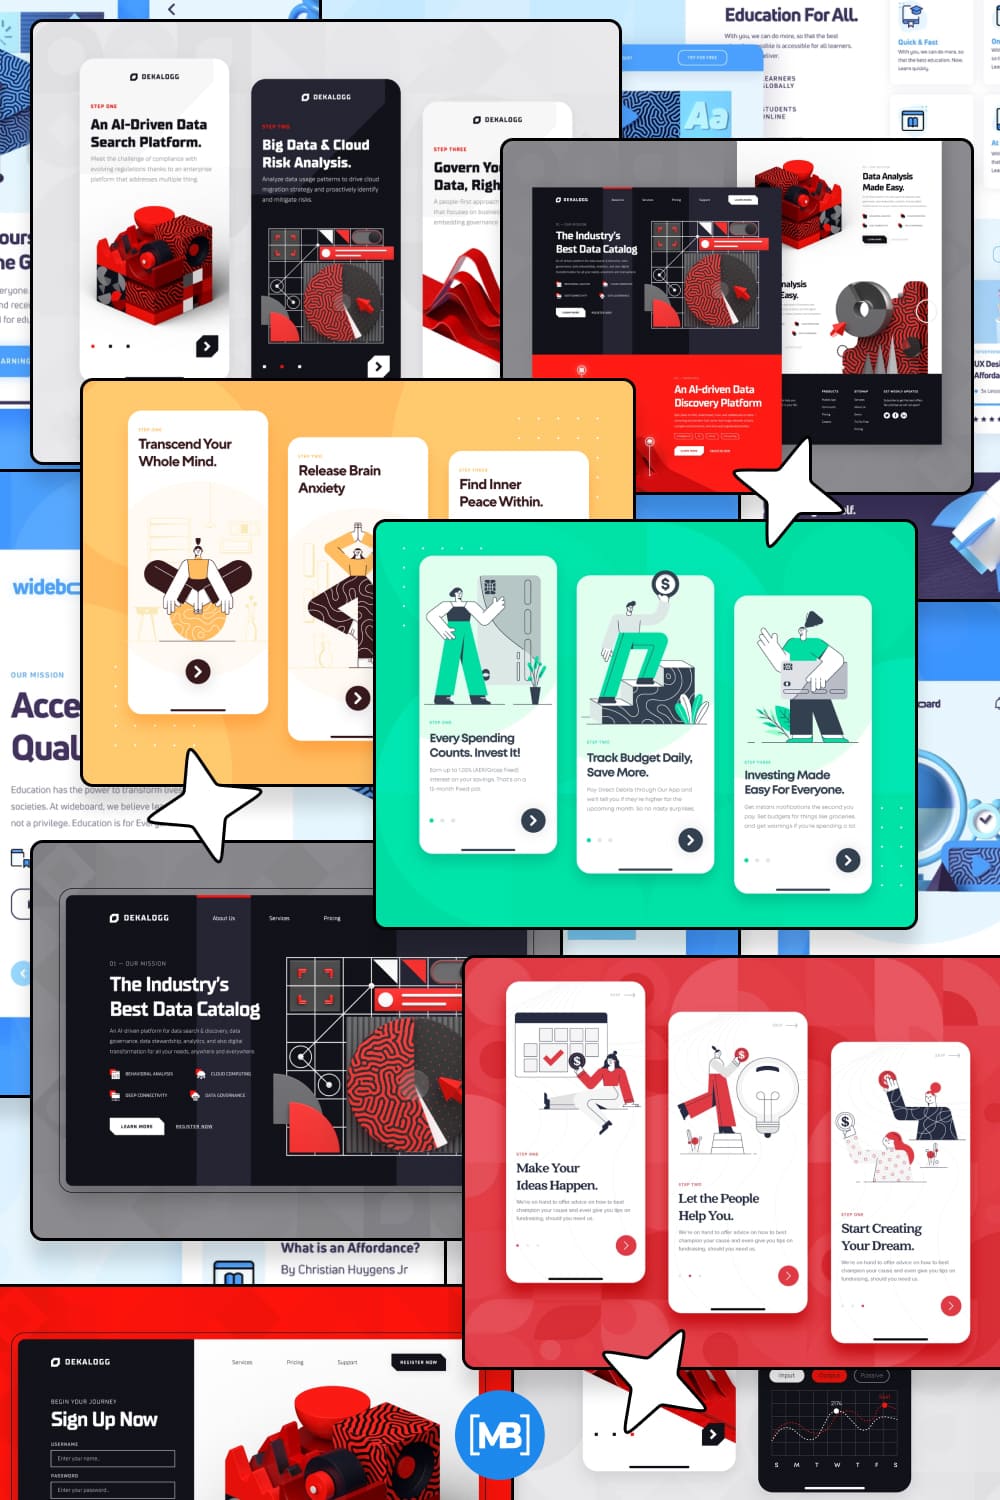 Cool illustrations and designs for your landing page.